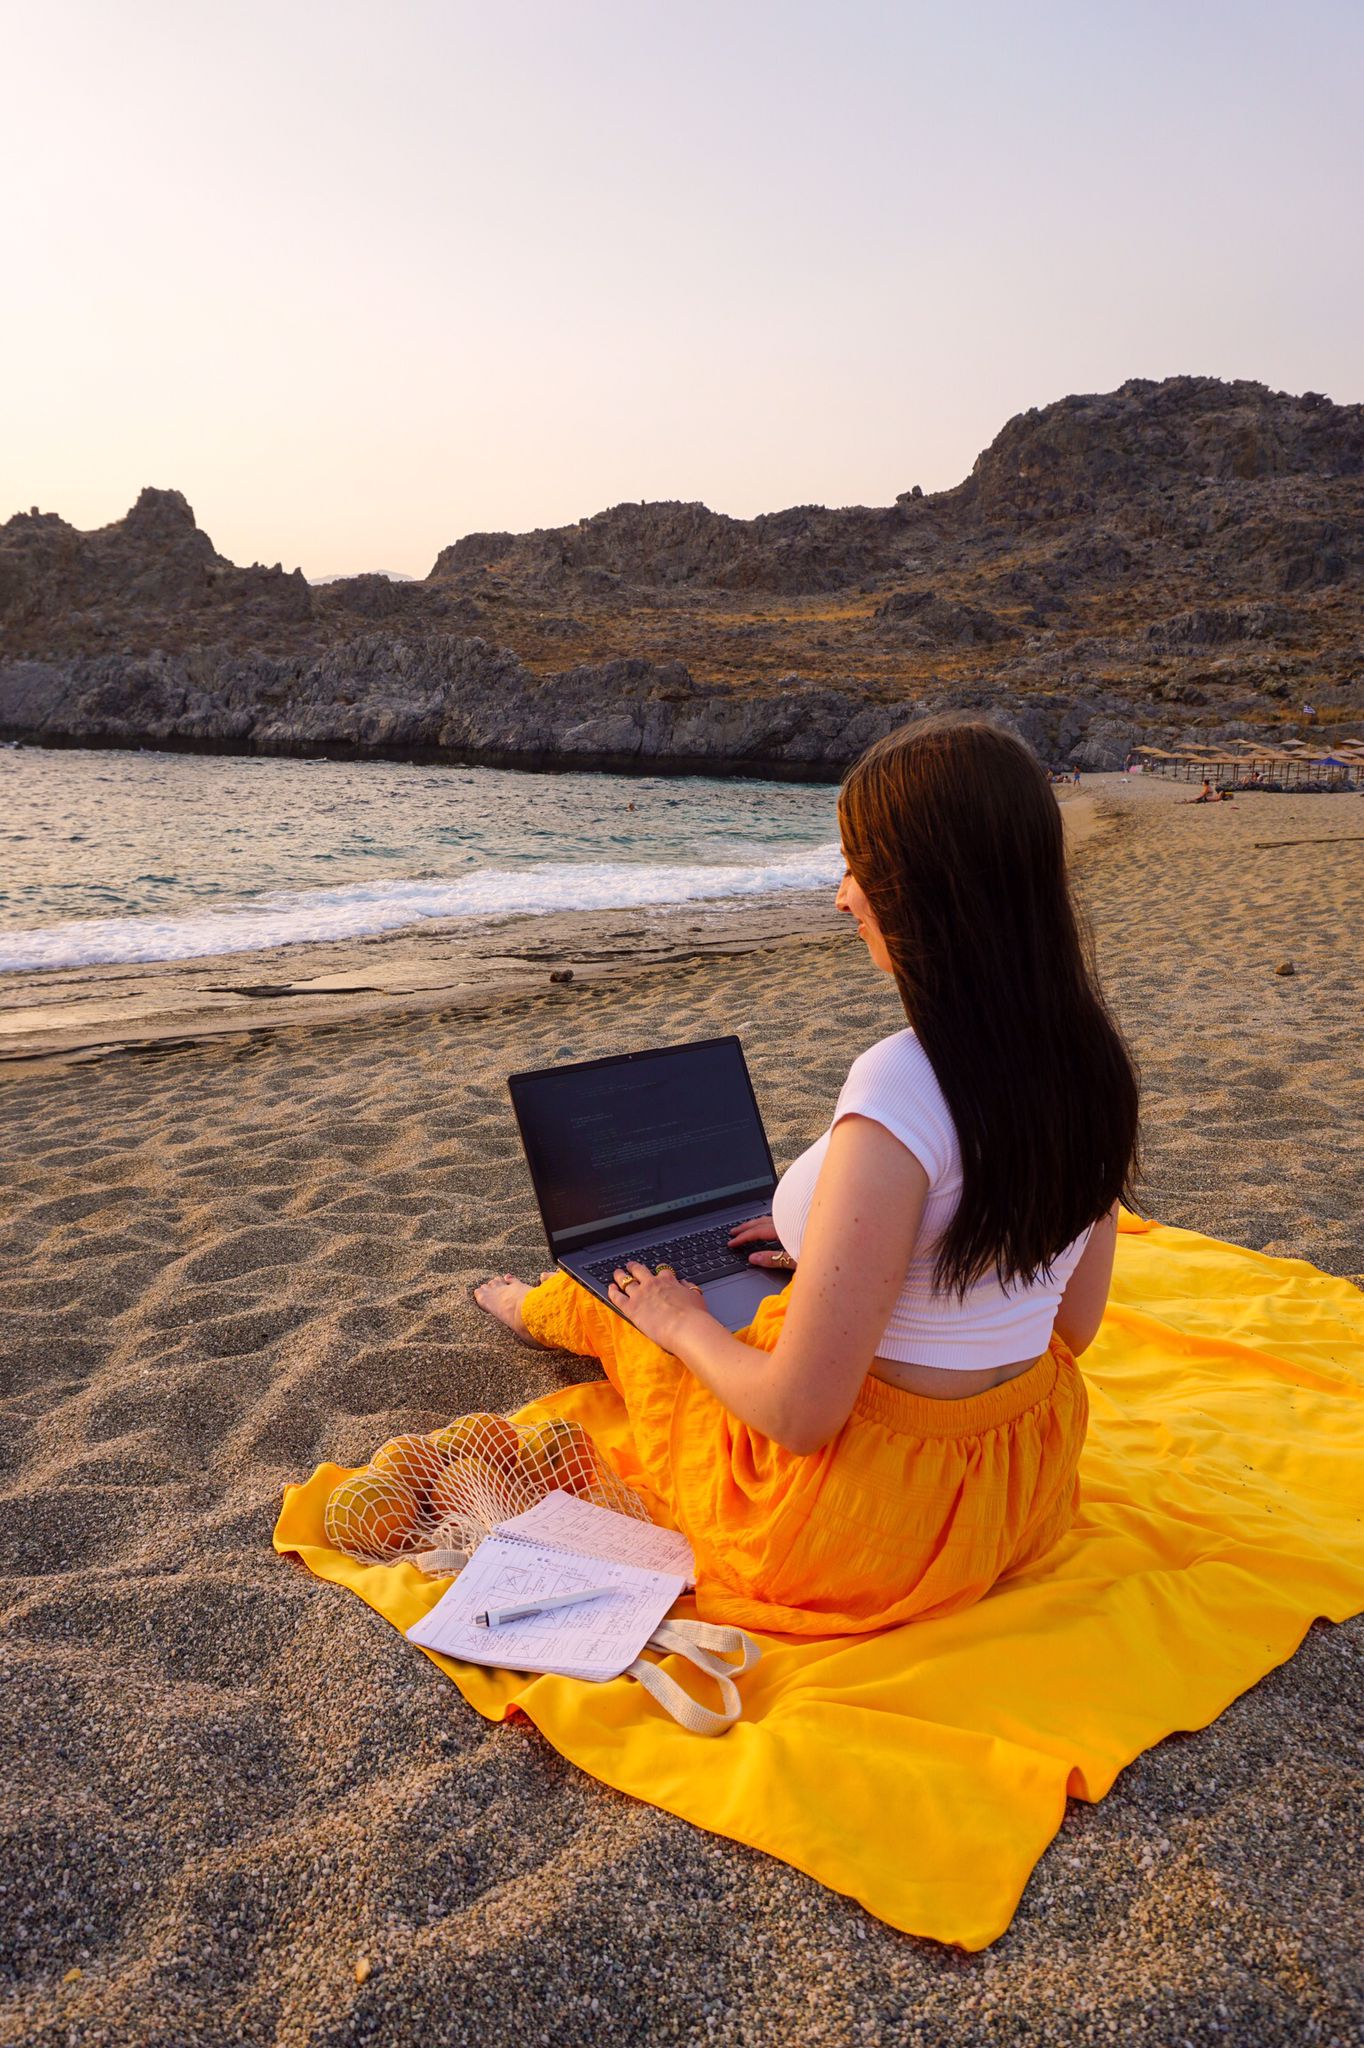 Anki working on her laptop at the beach